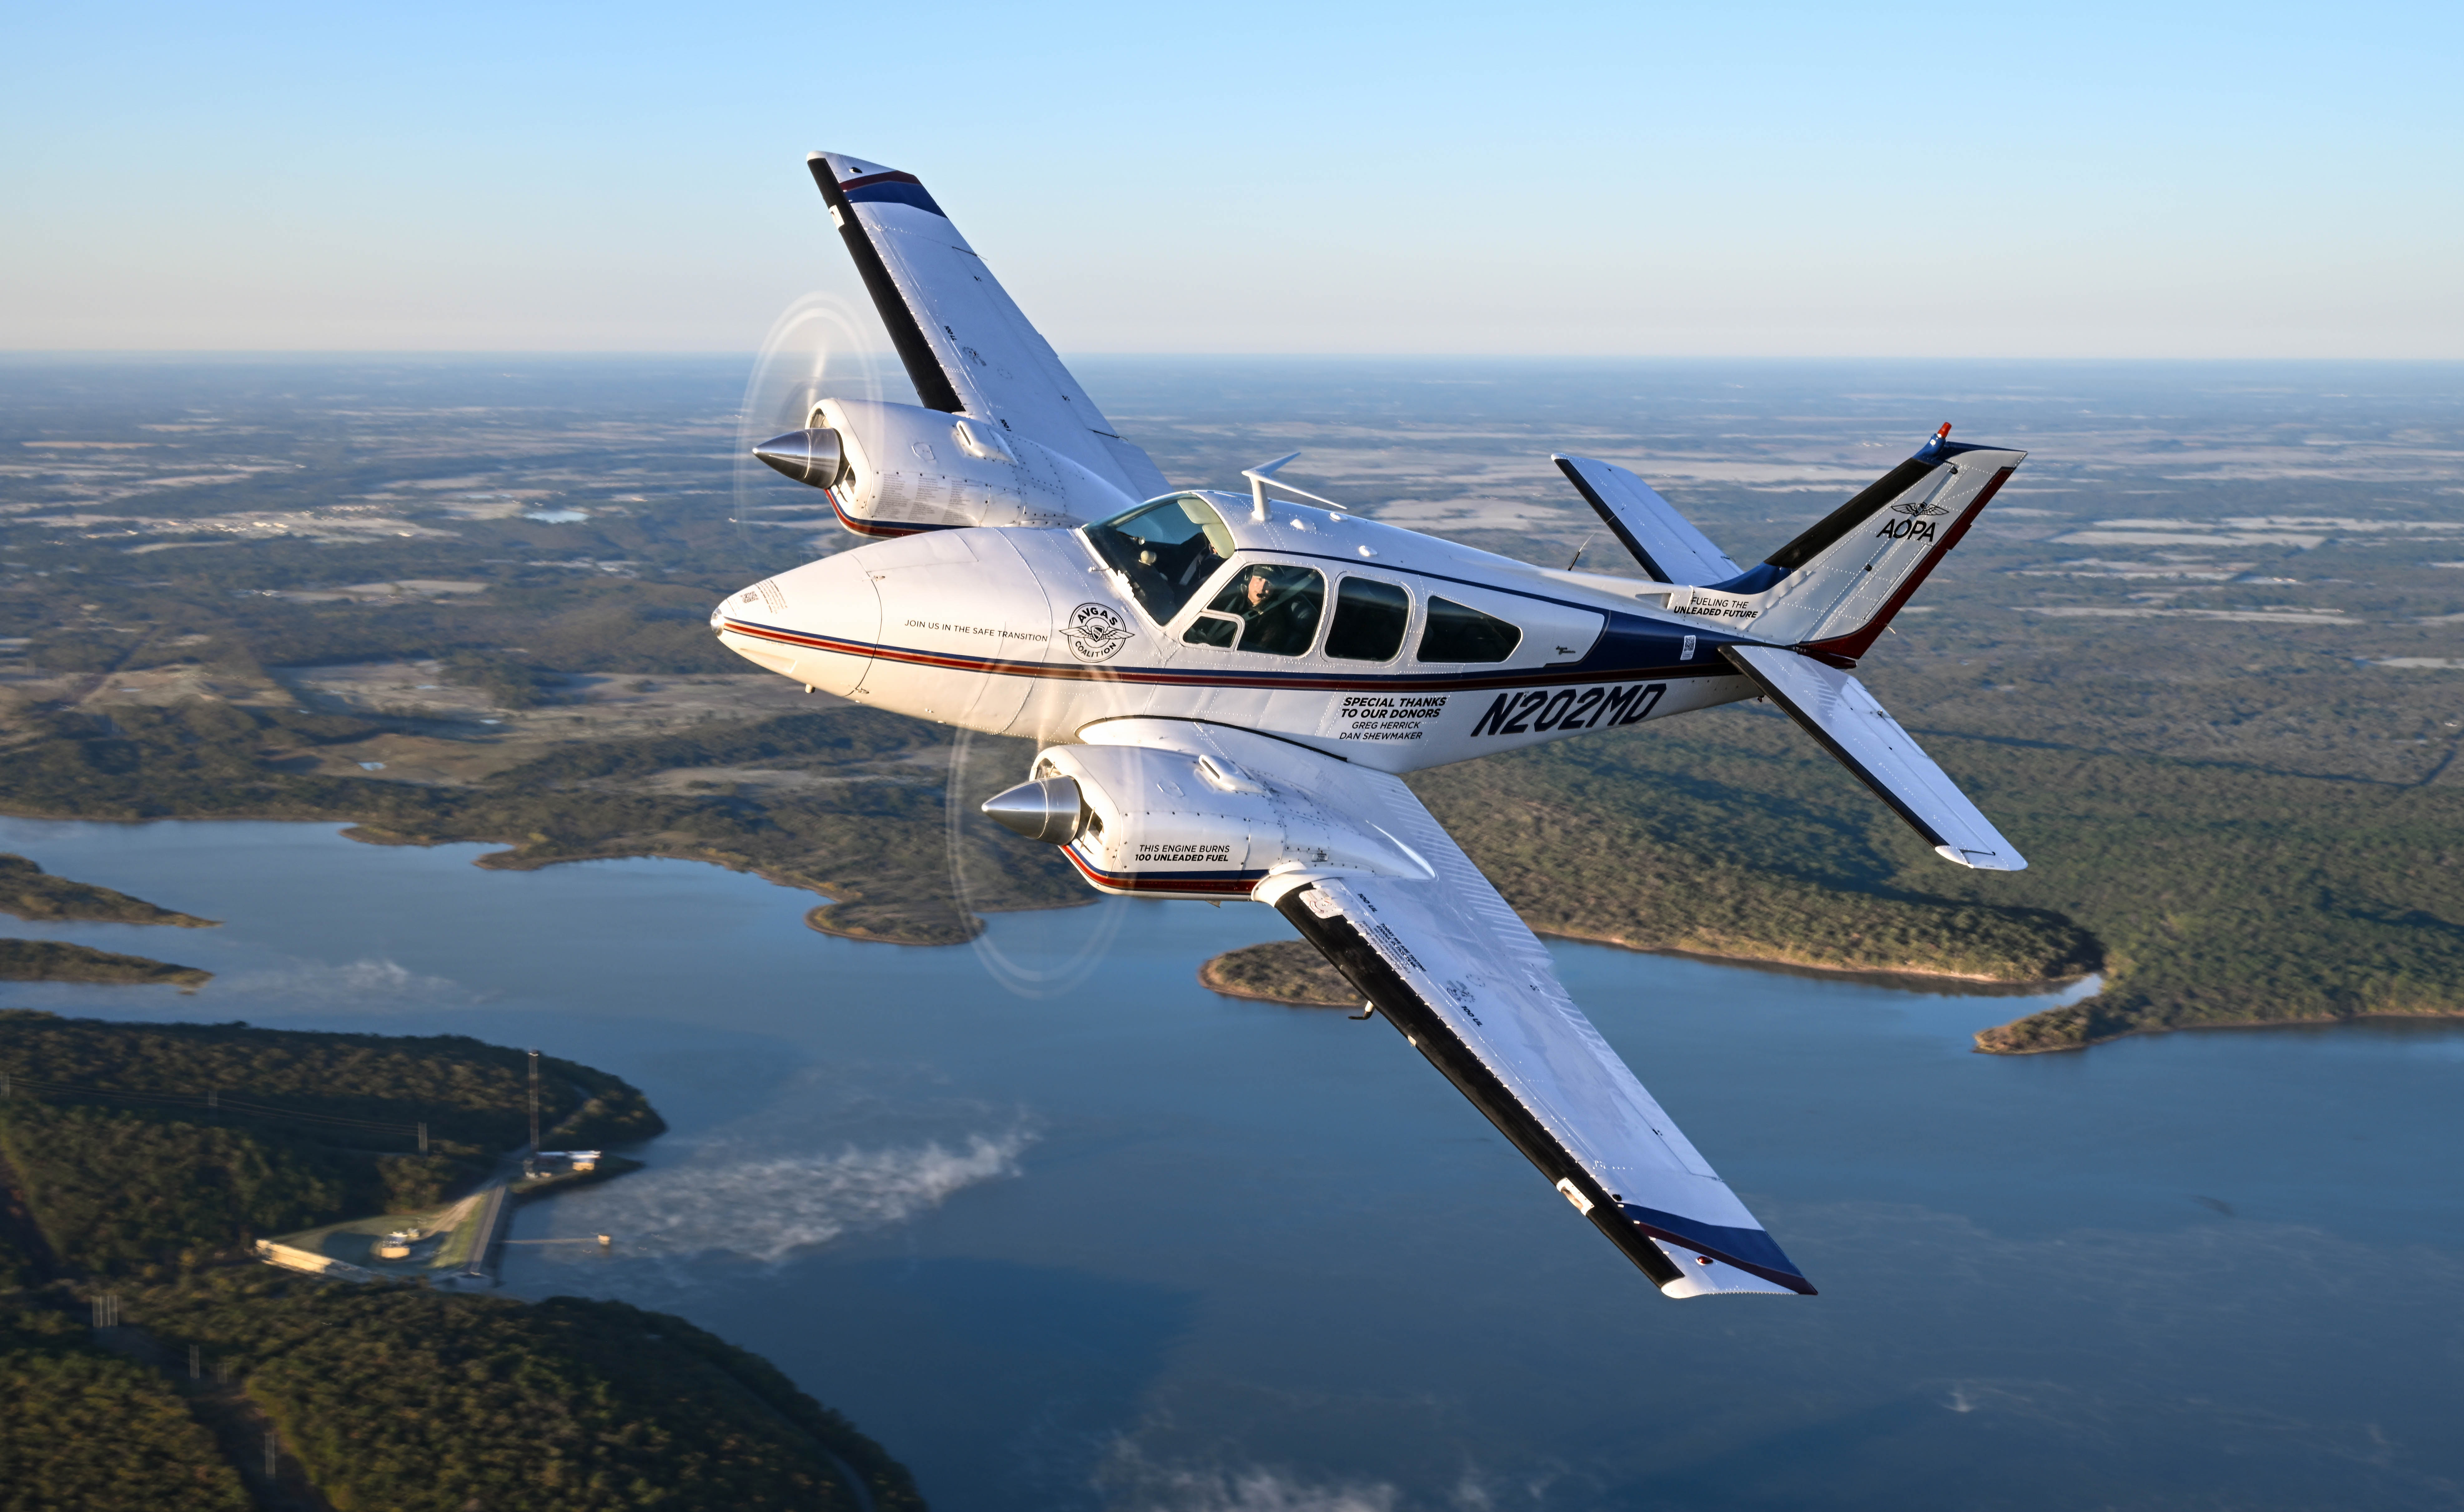 A Beechcraft Baron flew October 31 with GAMI G100UL in the left tank. Photo by David Tulis.